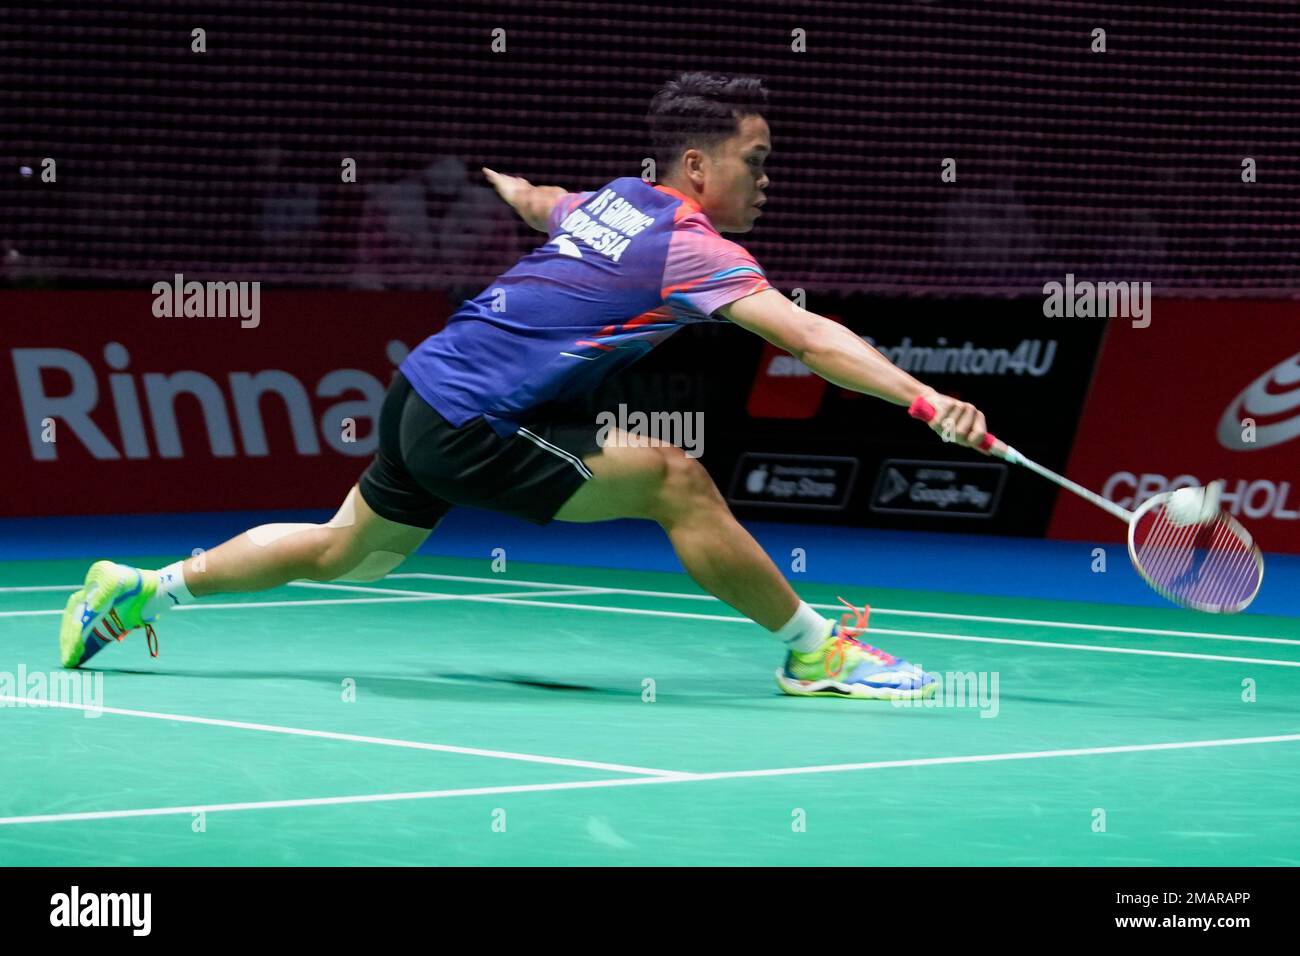 Anthony Sinisuka Ginting of Indonesia plays a return during a badminton game of the mens singles against Shi Yu Qi of China in the BWF World Championships in Tokyo, Thursday, Aug